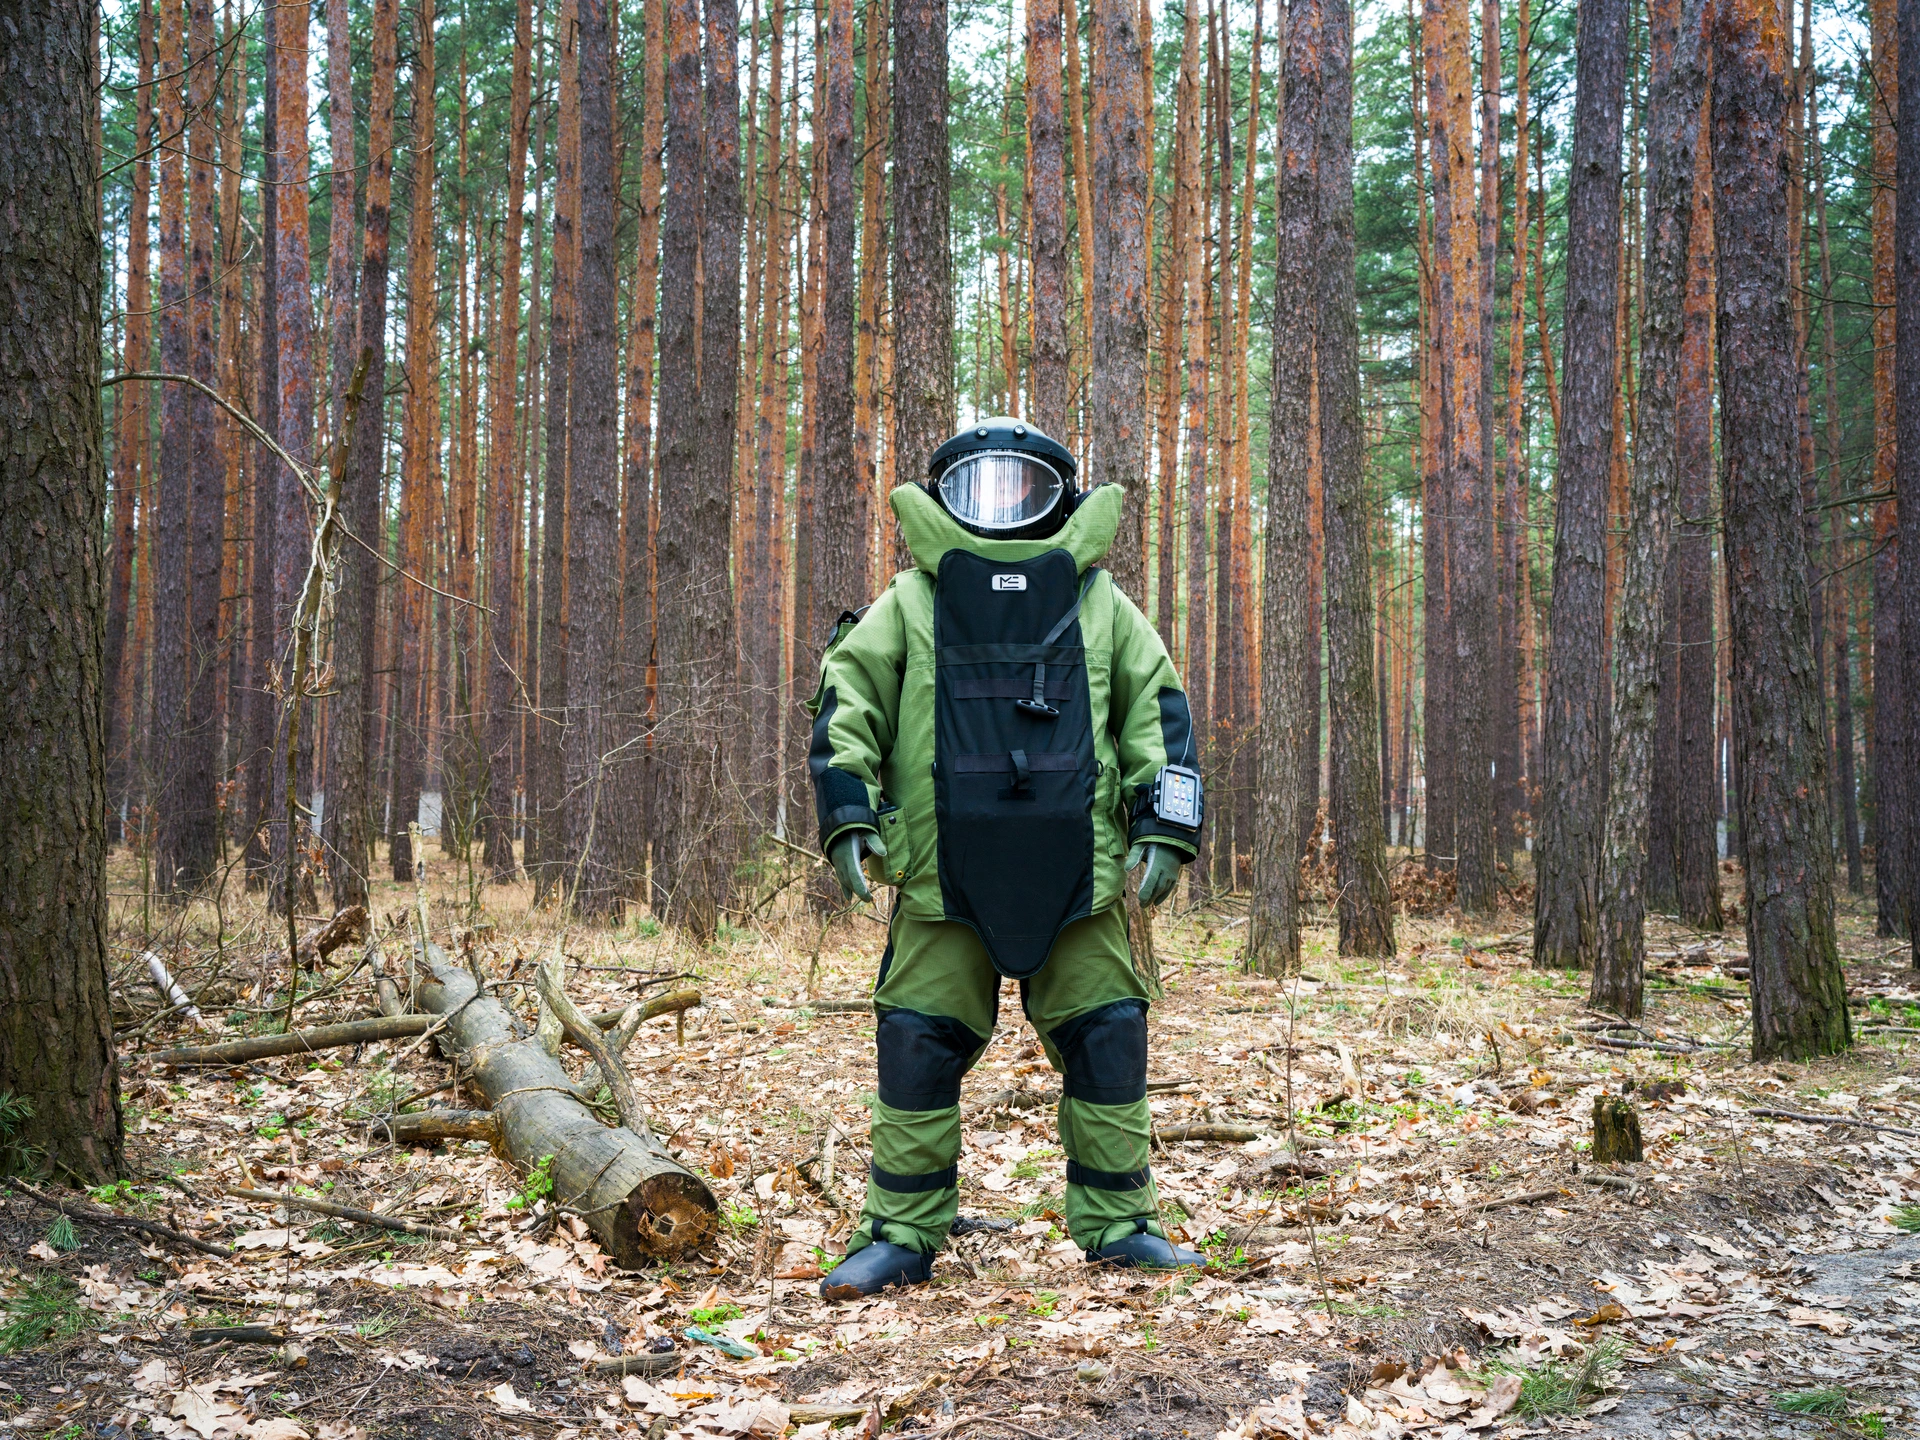 In the middle of some woods, an anonymous bomb technician for the State Emergency Service of Ukraine stands alone. Tall pine trees with brown and orange bark can be seen behind the technician, and the ground is covered in brown, dead leaves. To the right, a lone tree trunk lies on the ground. The technician wears a bulky, green and black body hazard suit with green gloves and a helmet covering their face. The light reflects off the transparent visor obscuring the person's facial features. The technician has an open stance, with their feet splayed.